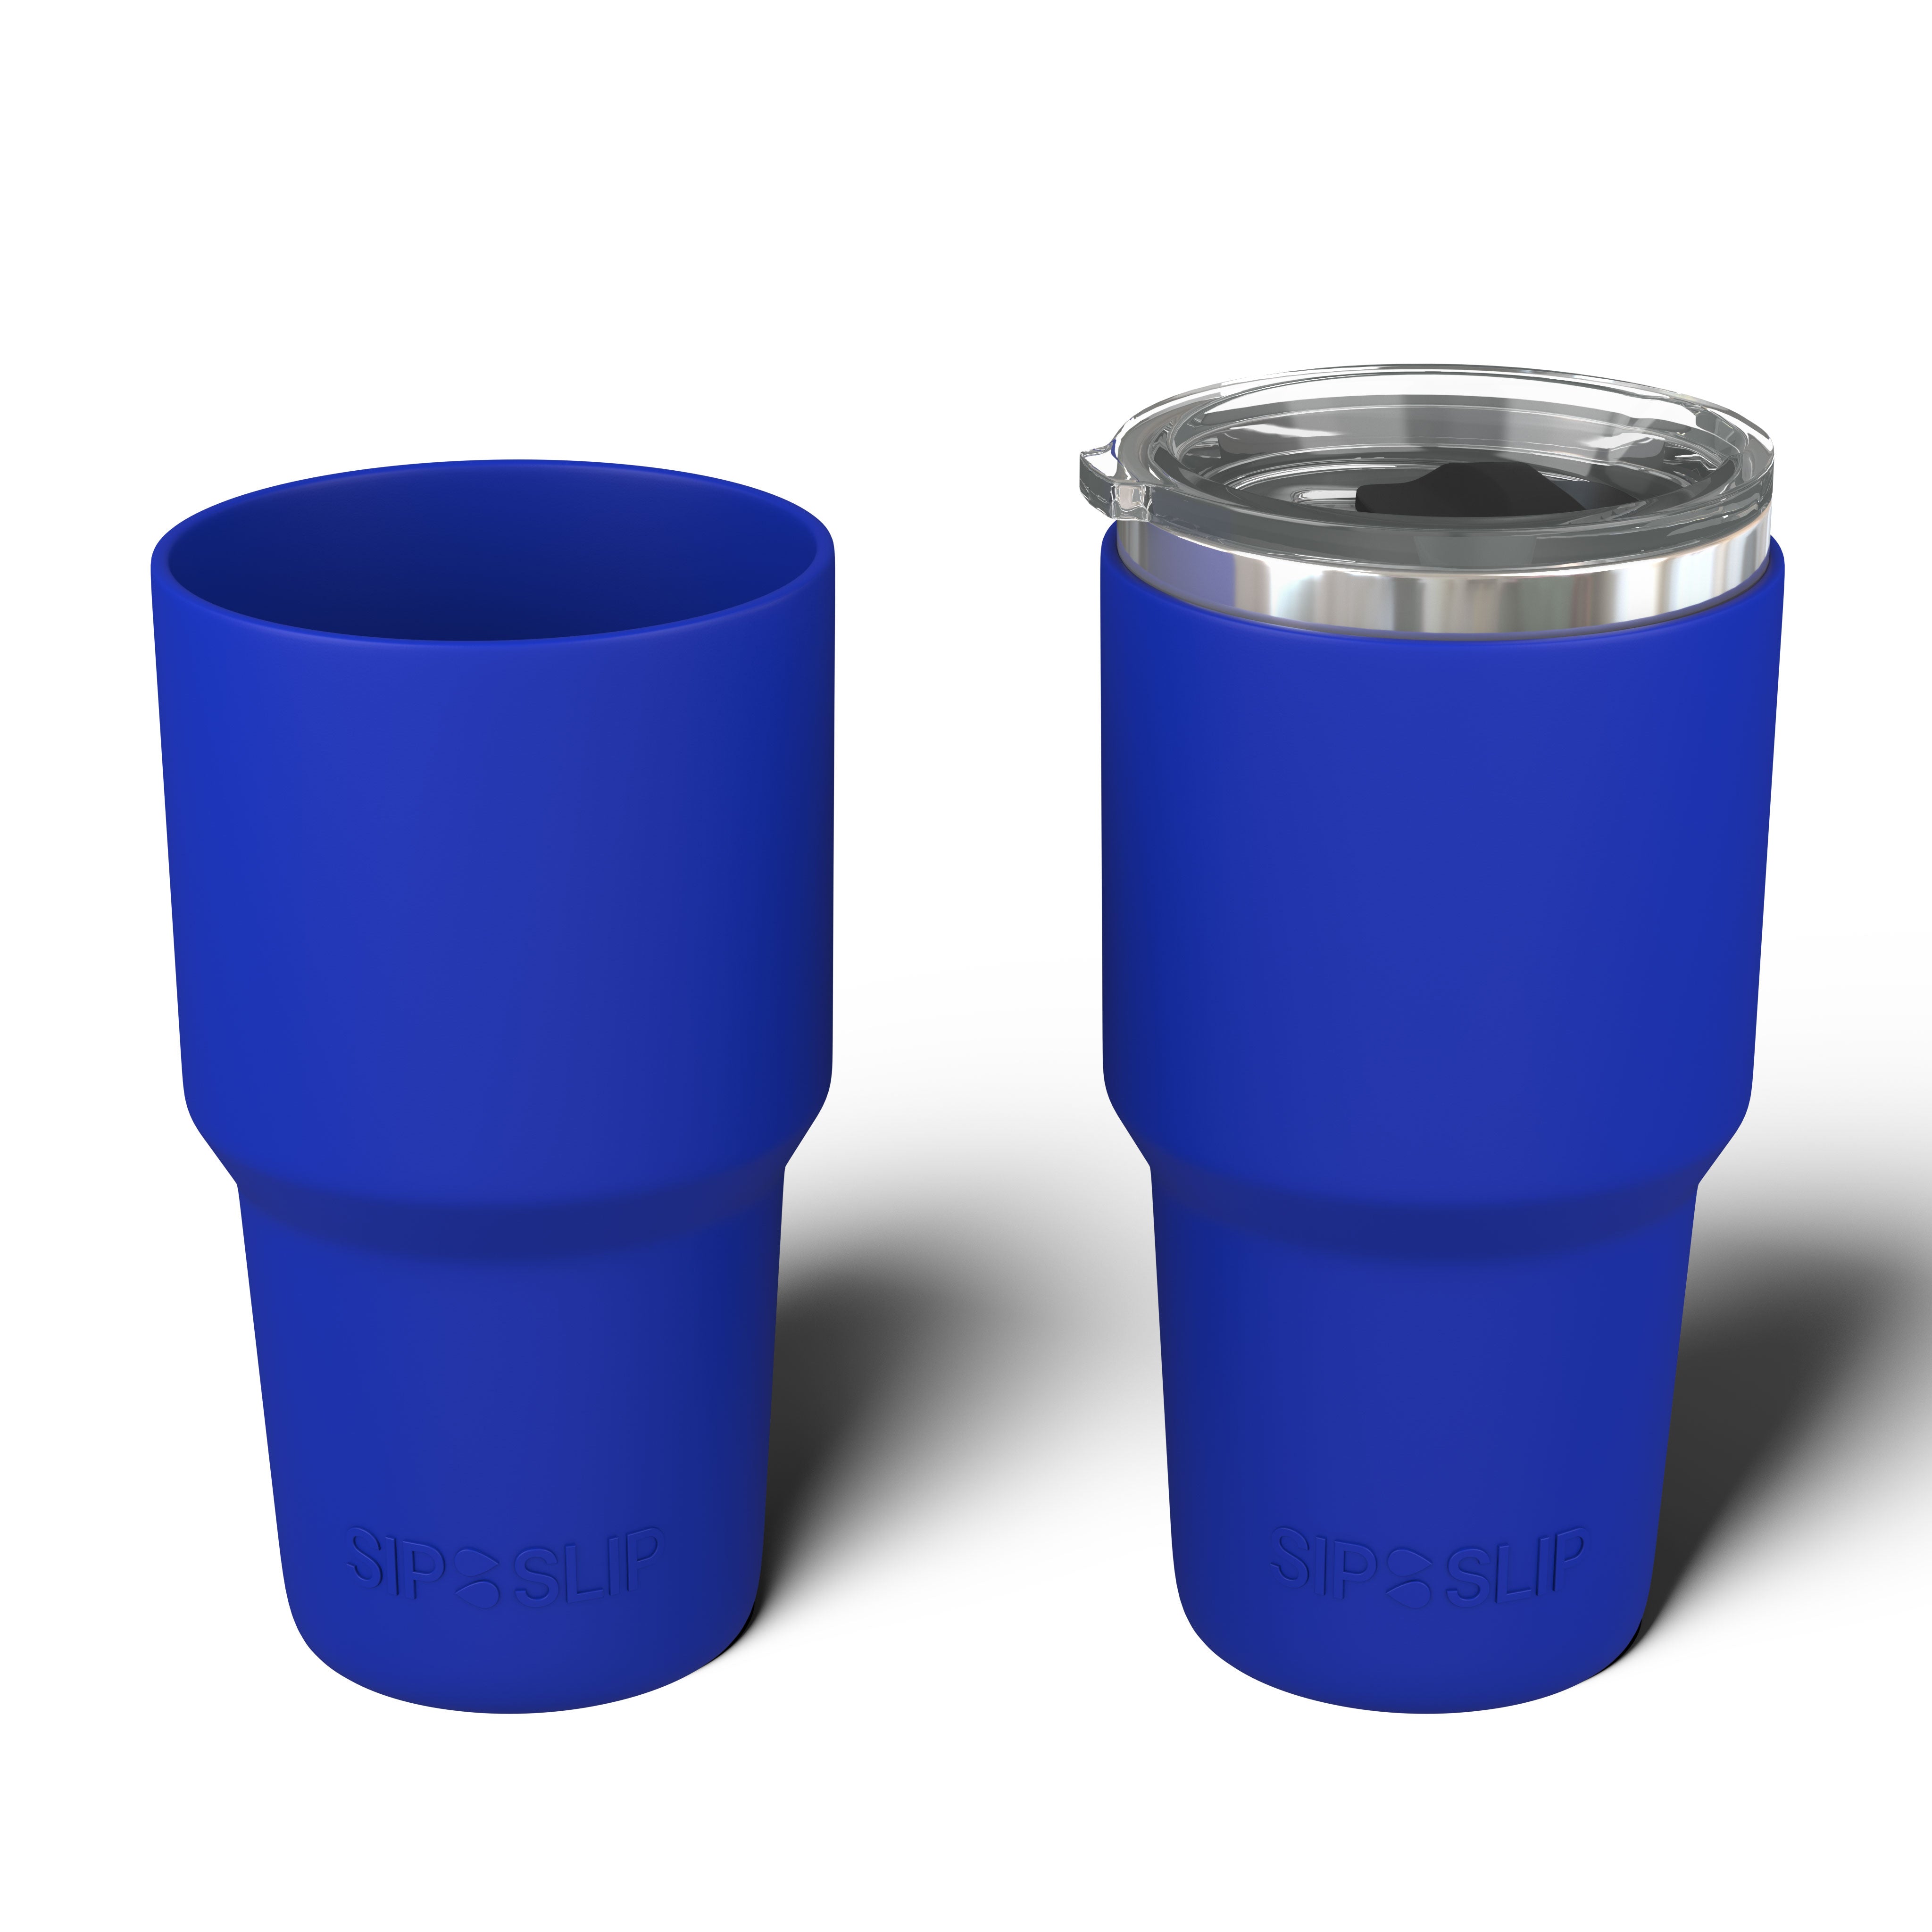 Sip Slip silicone tumbler sleeve - compatible with 20oz Yeti, RTIC, Ozark  Trail, Magellan tumblers a…See more Sip Slip silicone tumbler sleeve 